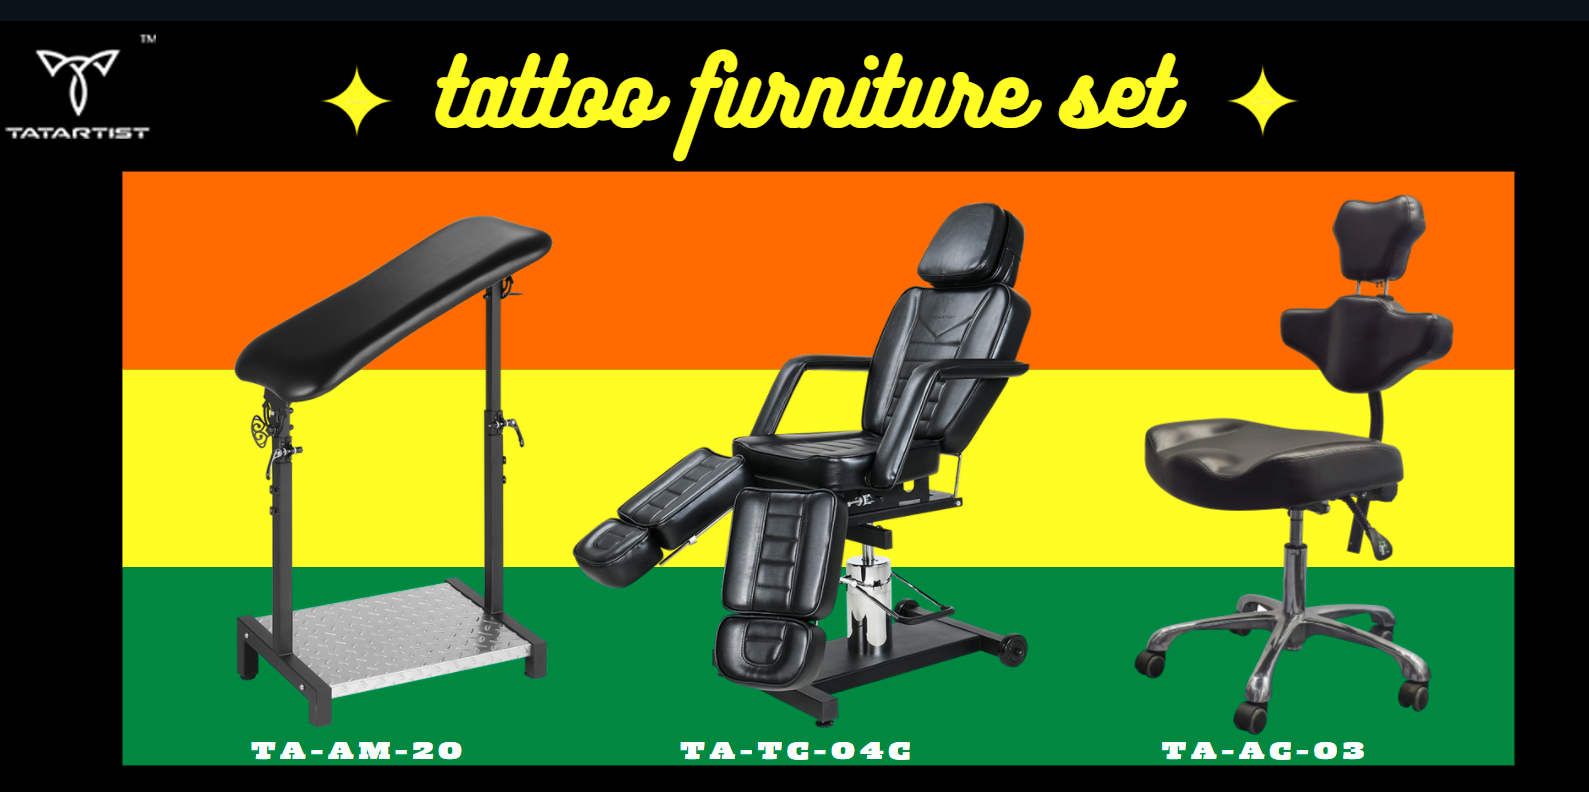 Recommended Tattoo Furniture